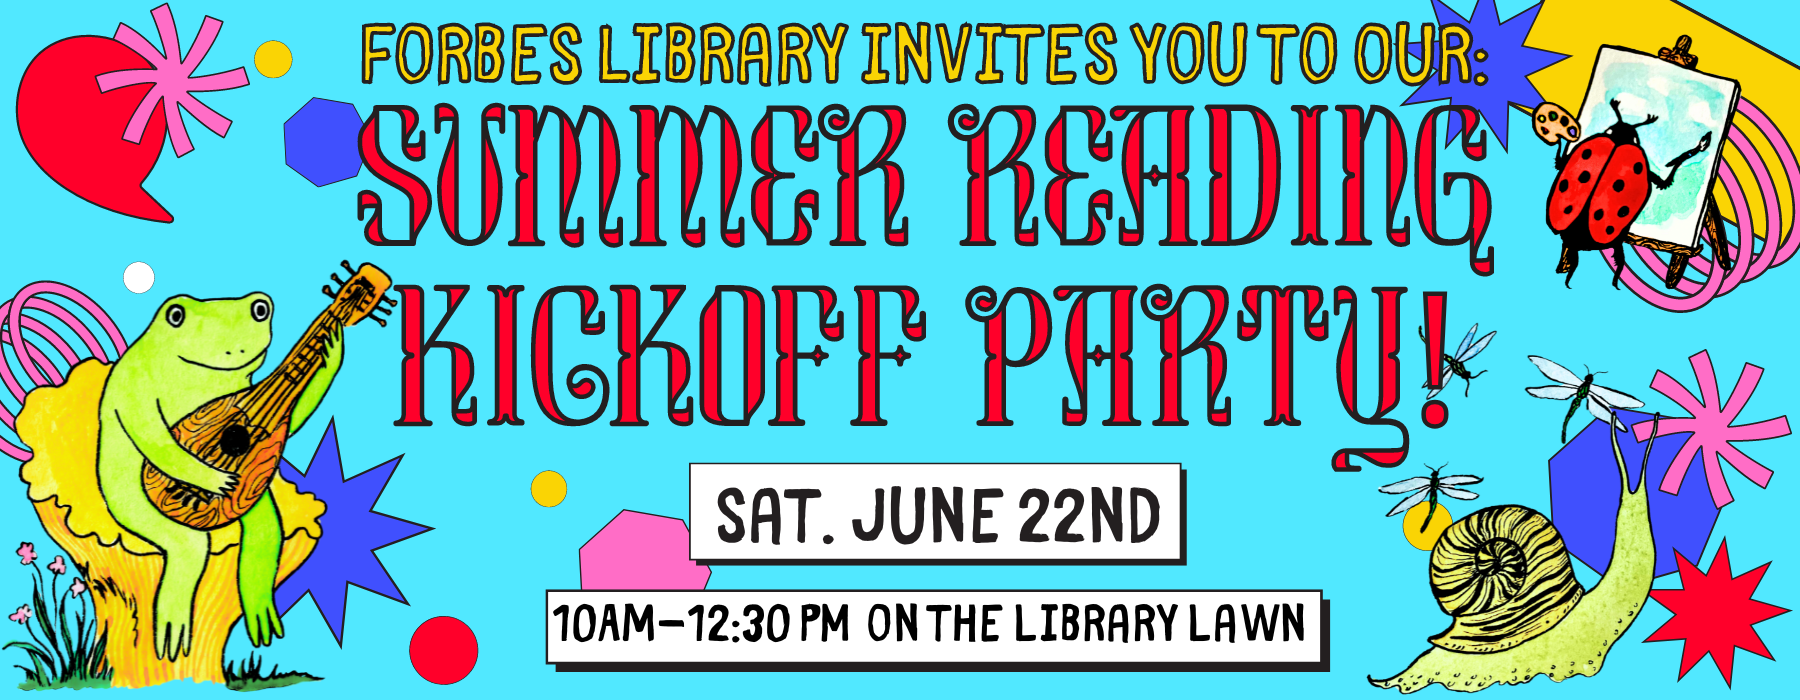 Forbes Library invites you to our: Summer Reading Kickoff Party! Sat. June 22nd, 10AM-12:30 PM on the library lawn